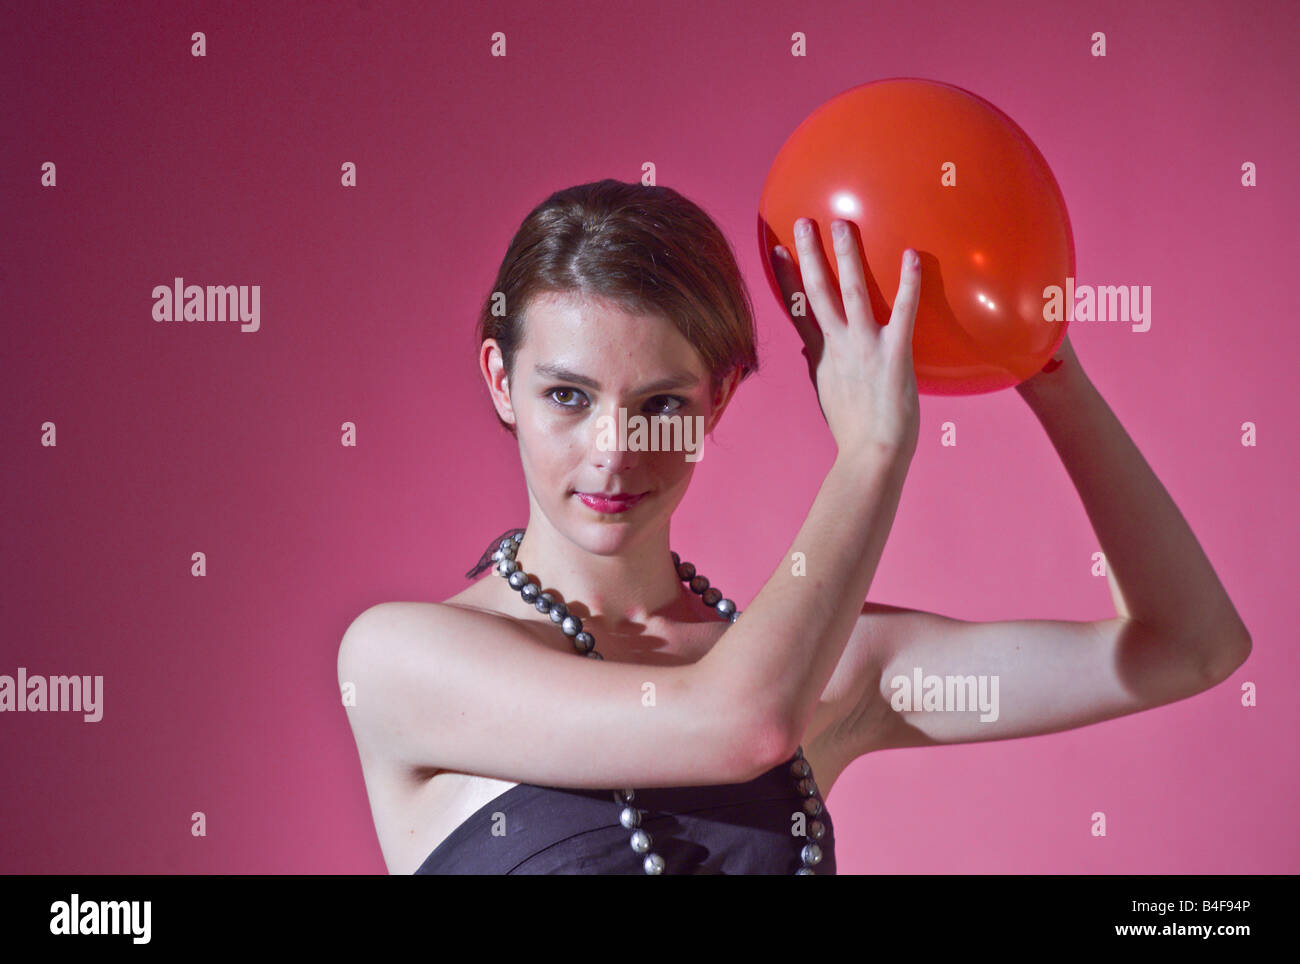 Model in black dress with the red ball model released Stock Photo